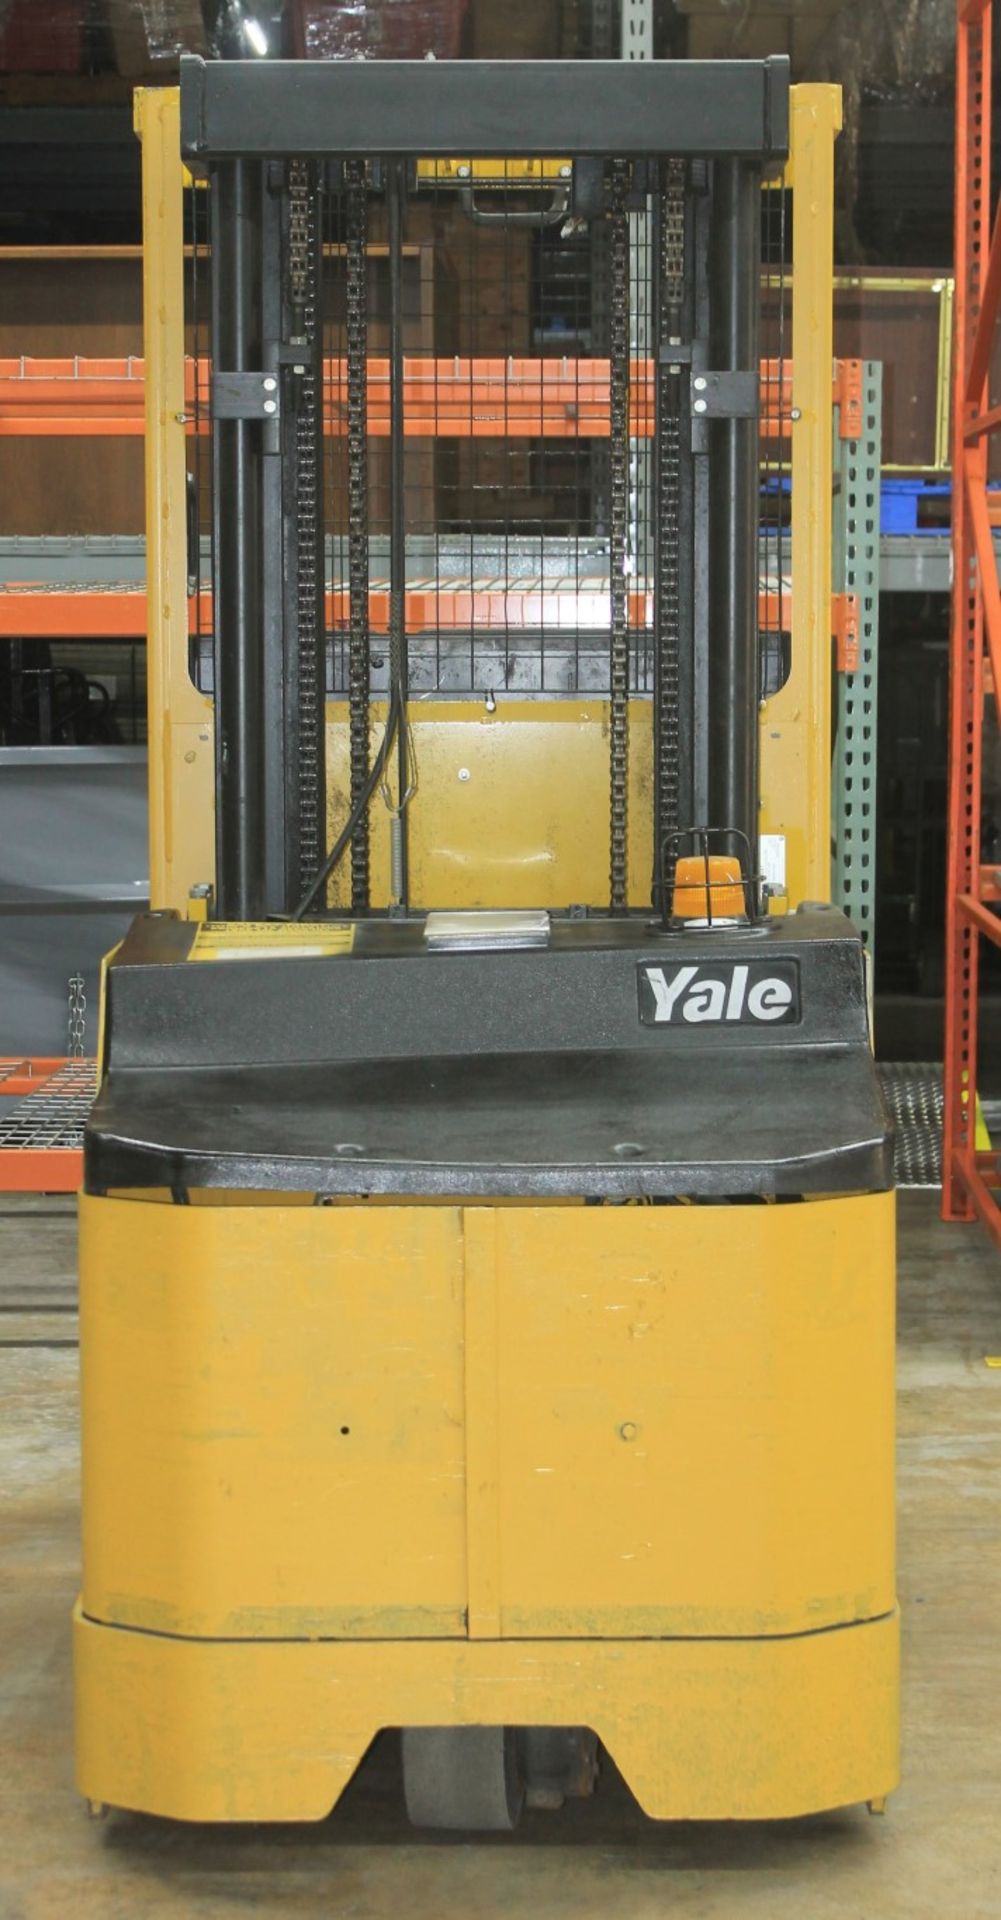 2007 YALE 3000 LBS. CAP ORDER PICKER/FORKLIFT, (WATCH VIDEO) - Image 2 of 6